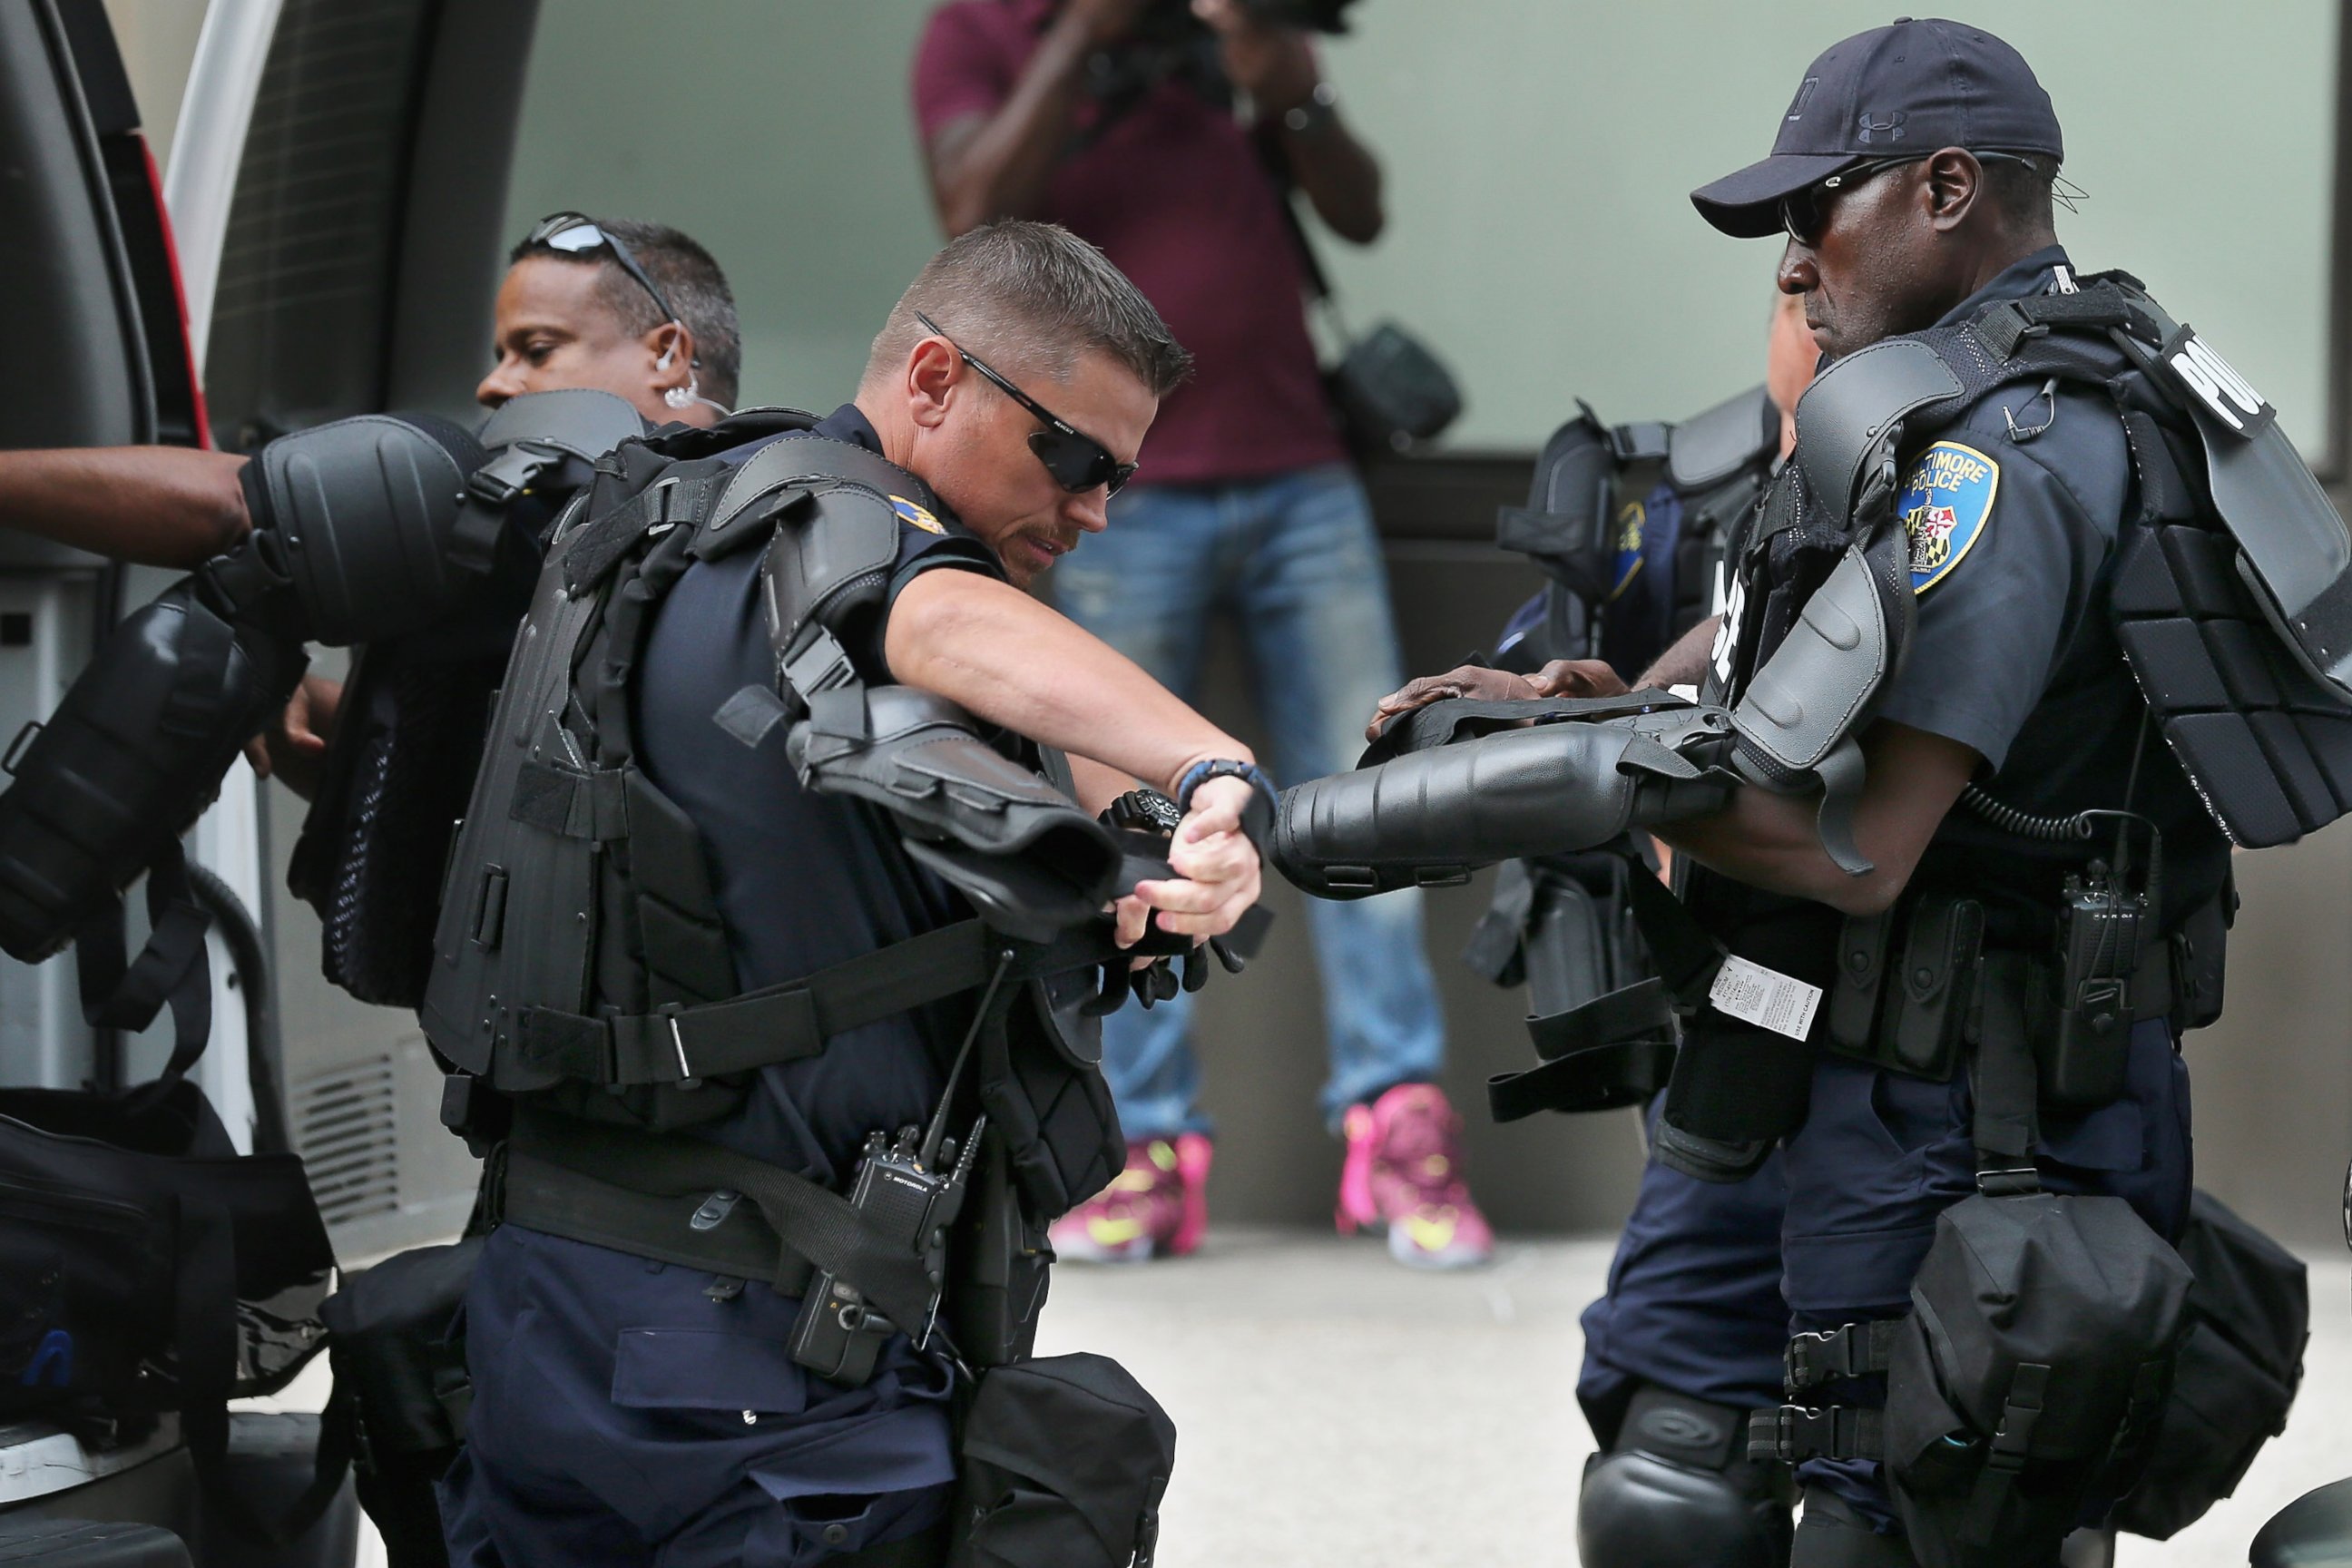 PHOTO: Baltimore City police don riot gear near a demonstration at the Inner Harbor, Sept. 2, 2015 in Baltimore, Maryland.